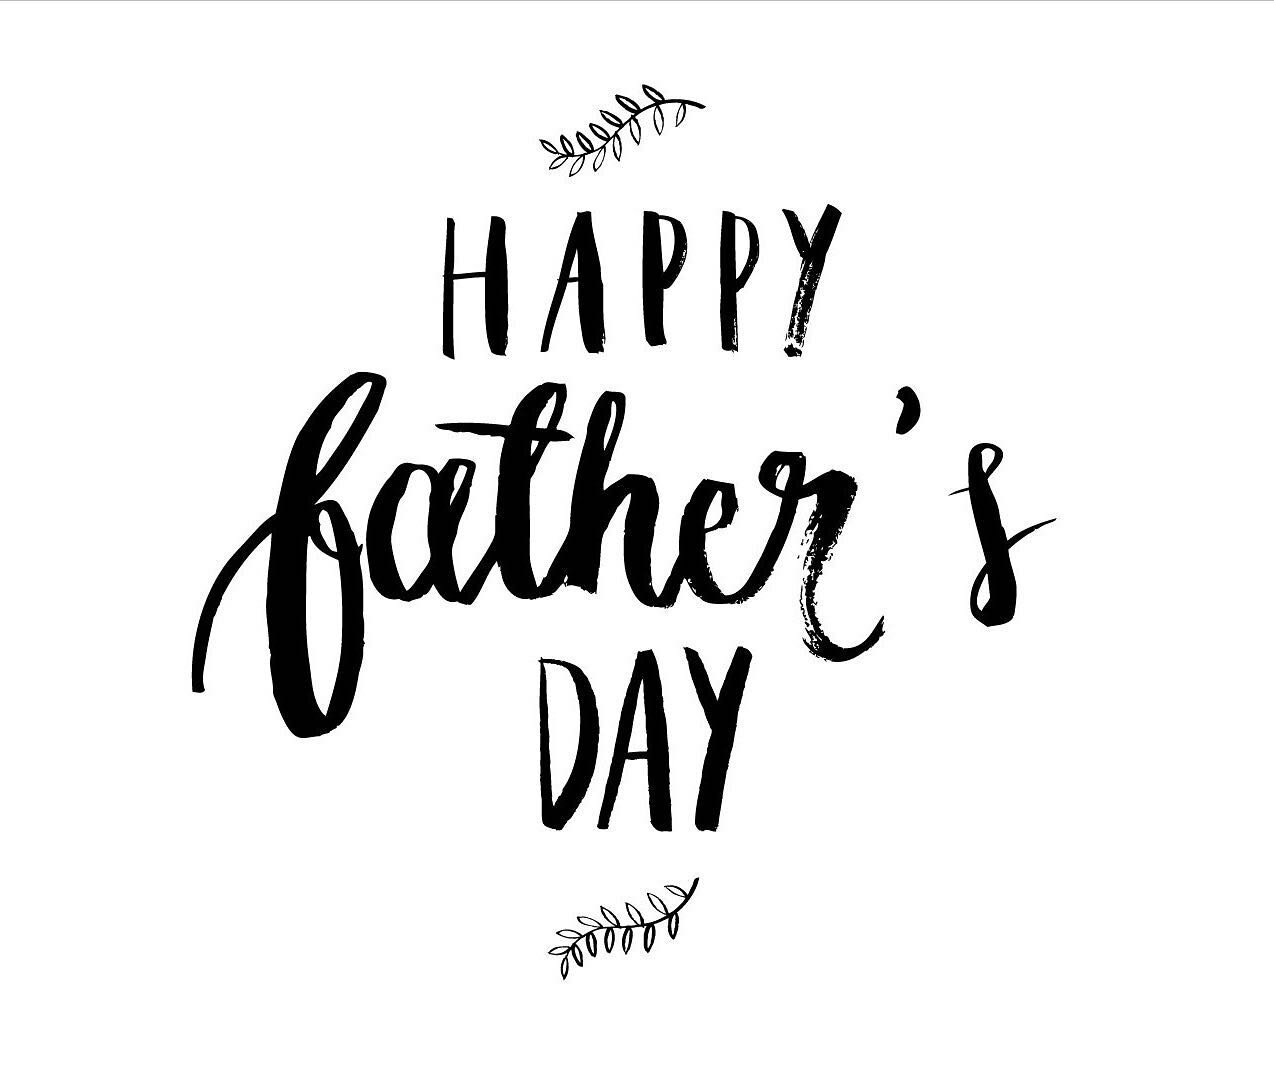 ✨Happy Father's Day to fathers everywhere- birth fathers, stepfathers, adoptive and foster fathers, grandfathers and all of those caring men who mentor children and fill the role of absent dads ✨ cheers to all the love you give not only today, but ea